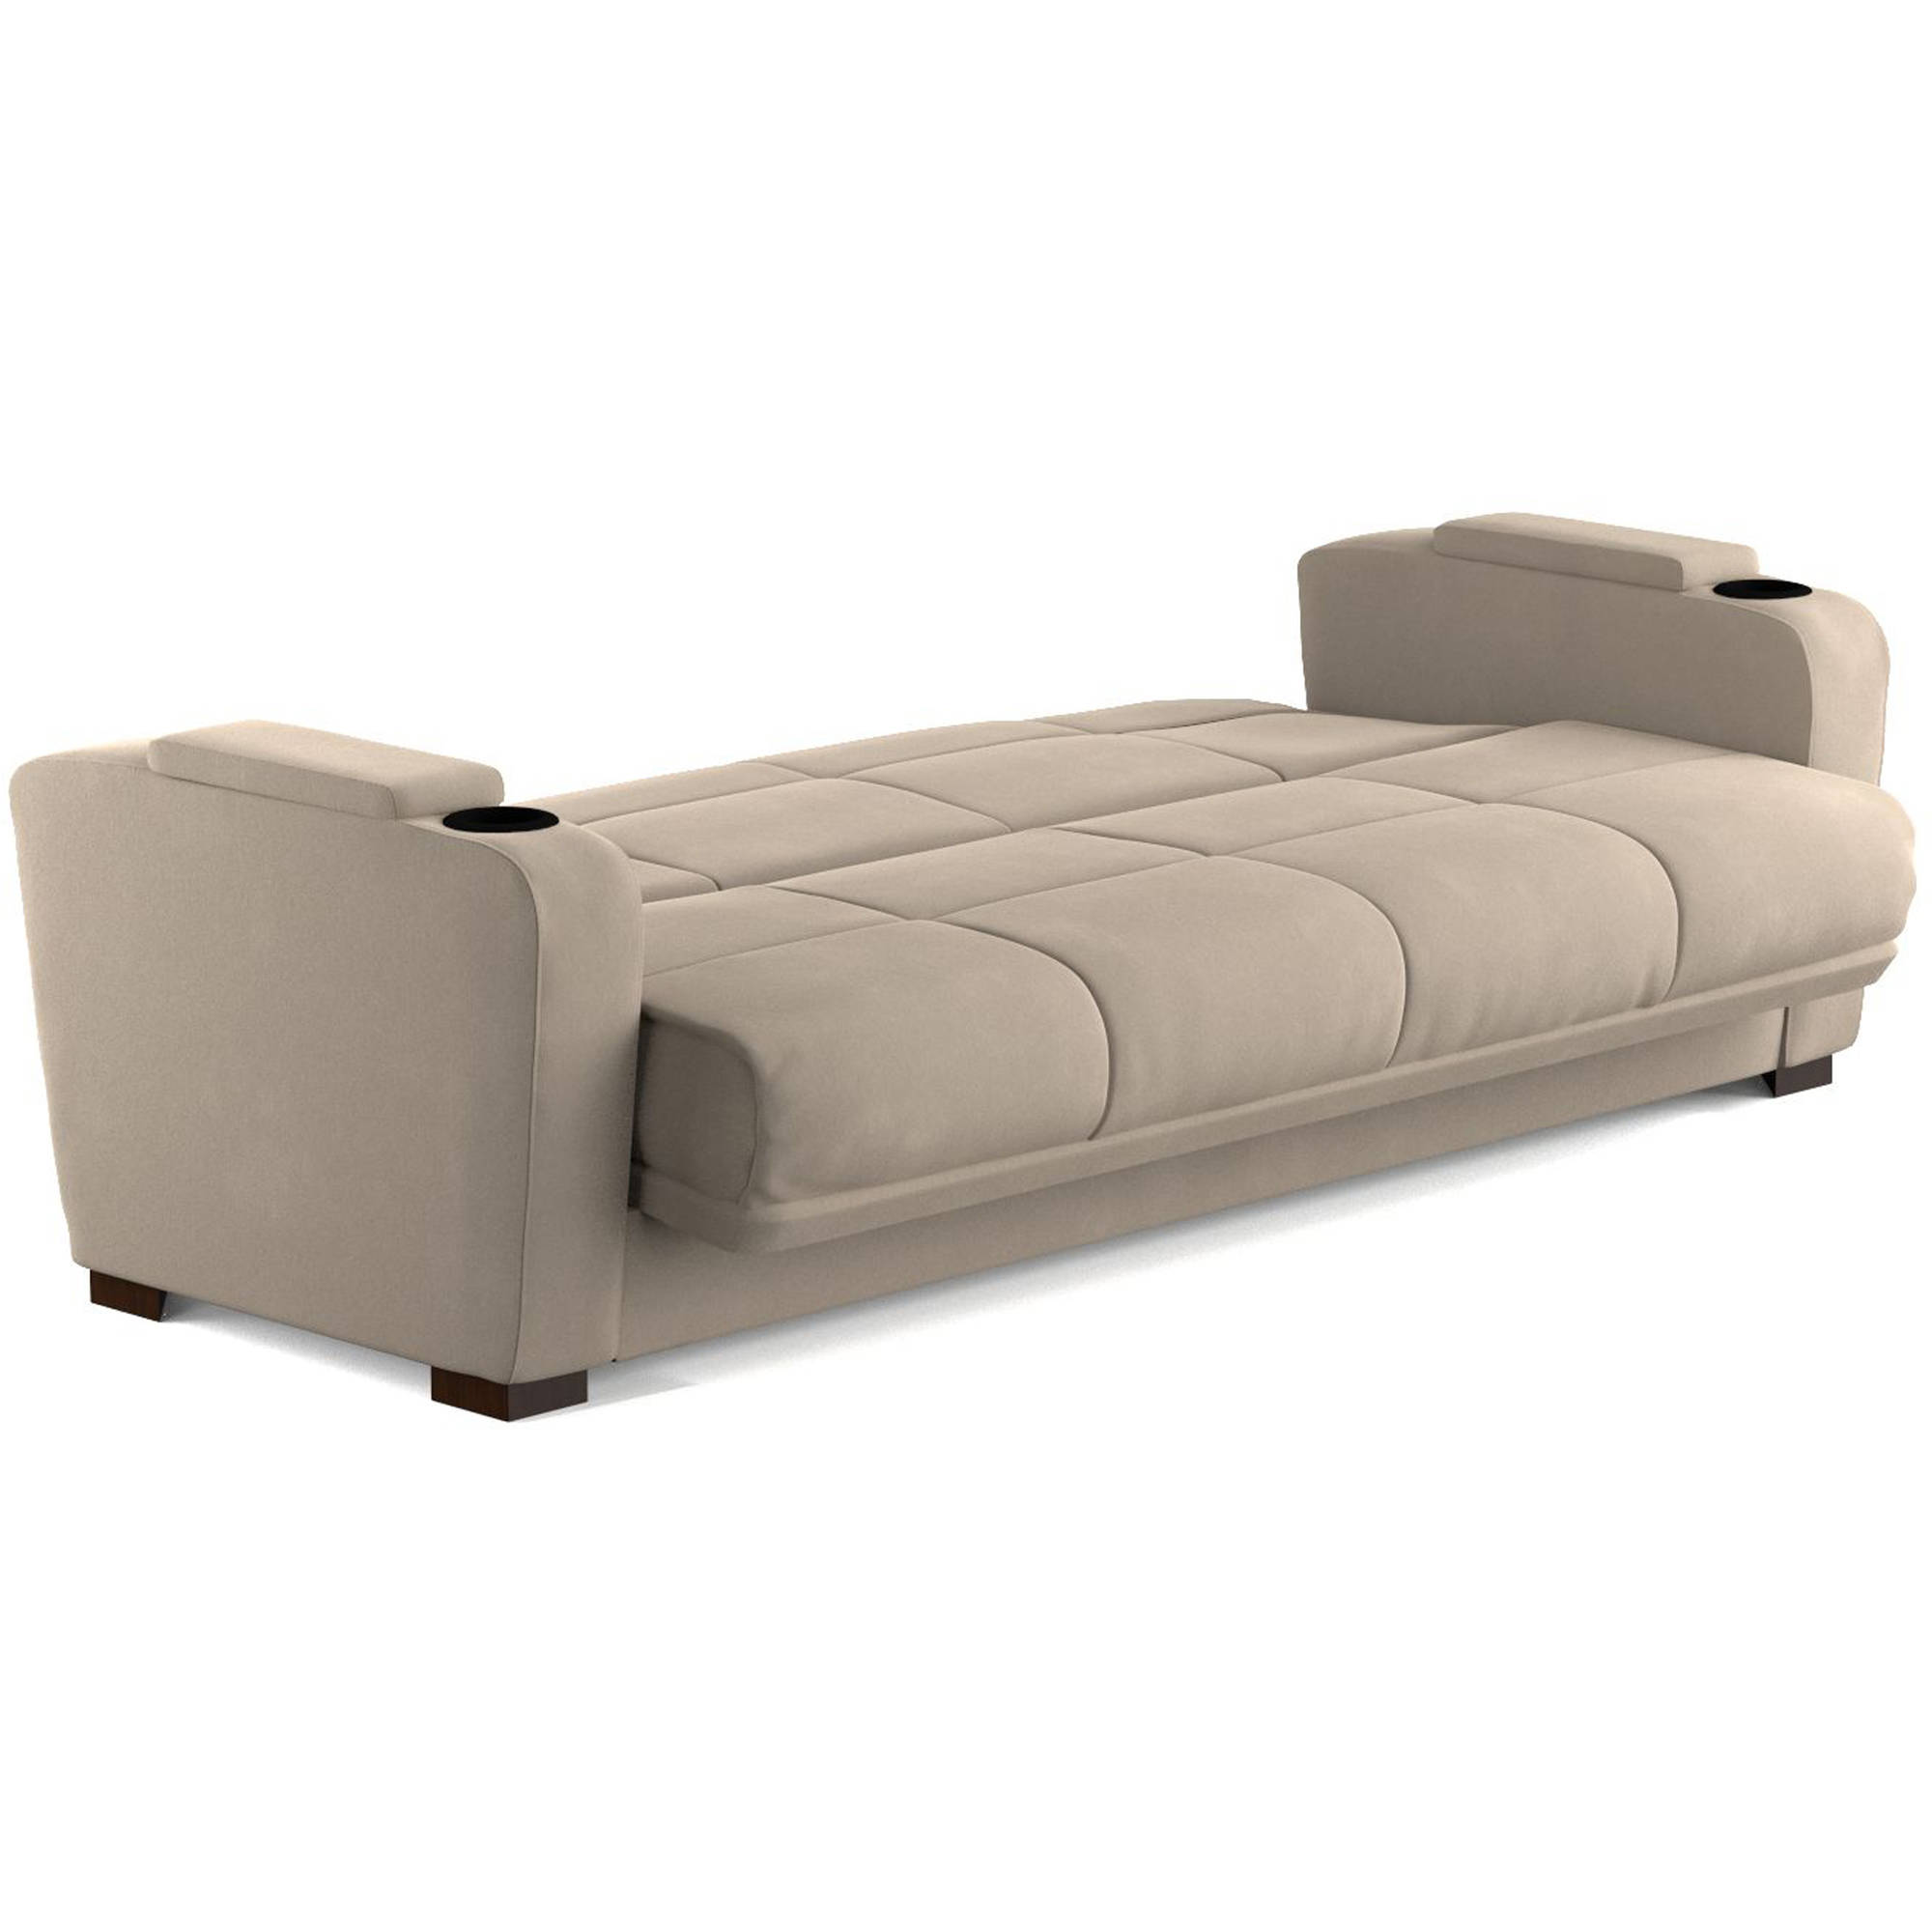 Mainstays Tyler Futon with Storage Sofa Sleeper Bed, Multiple Colors -  Traveller Location